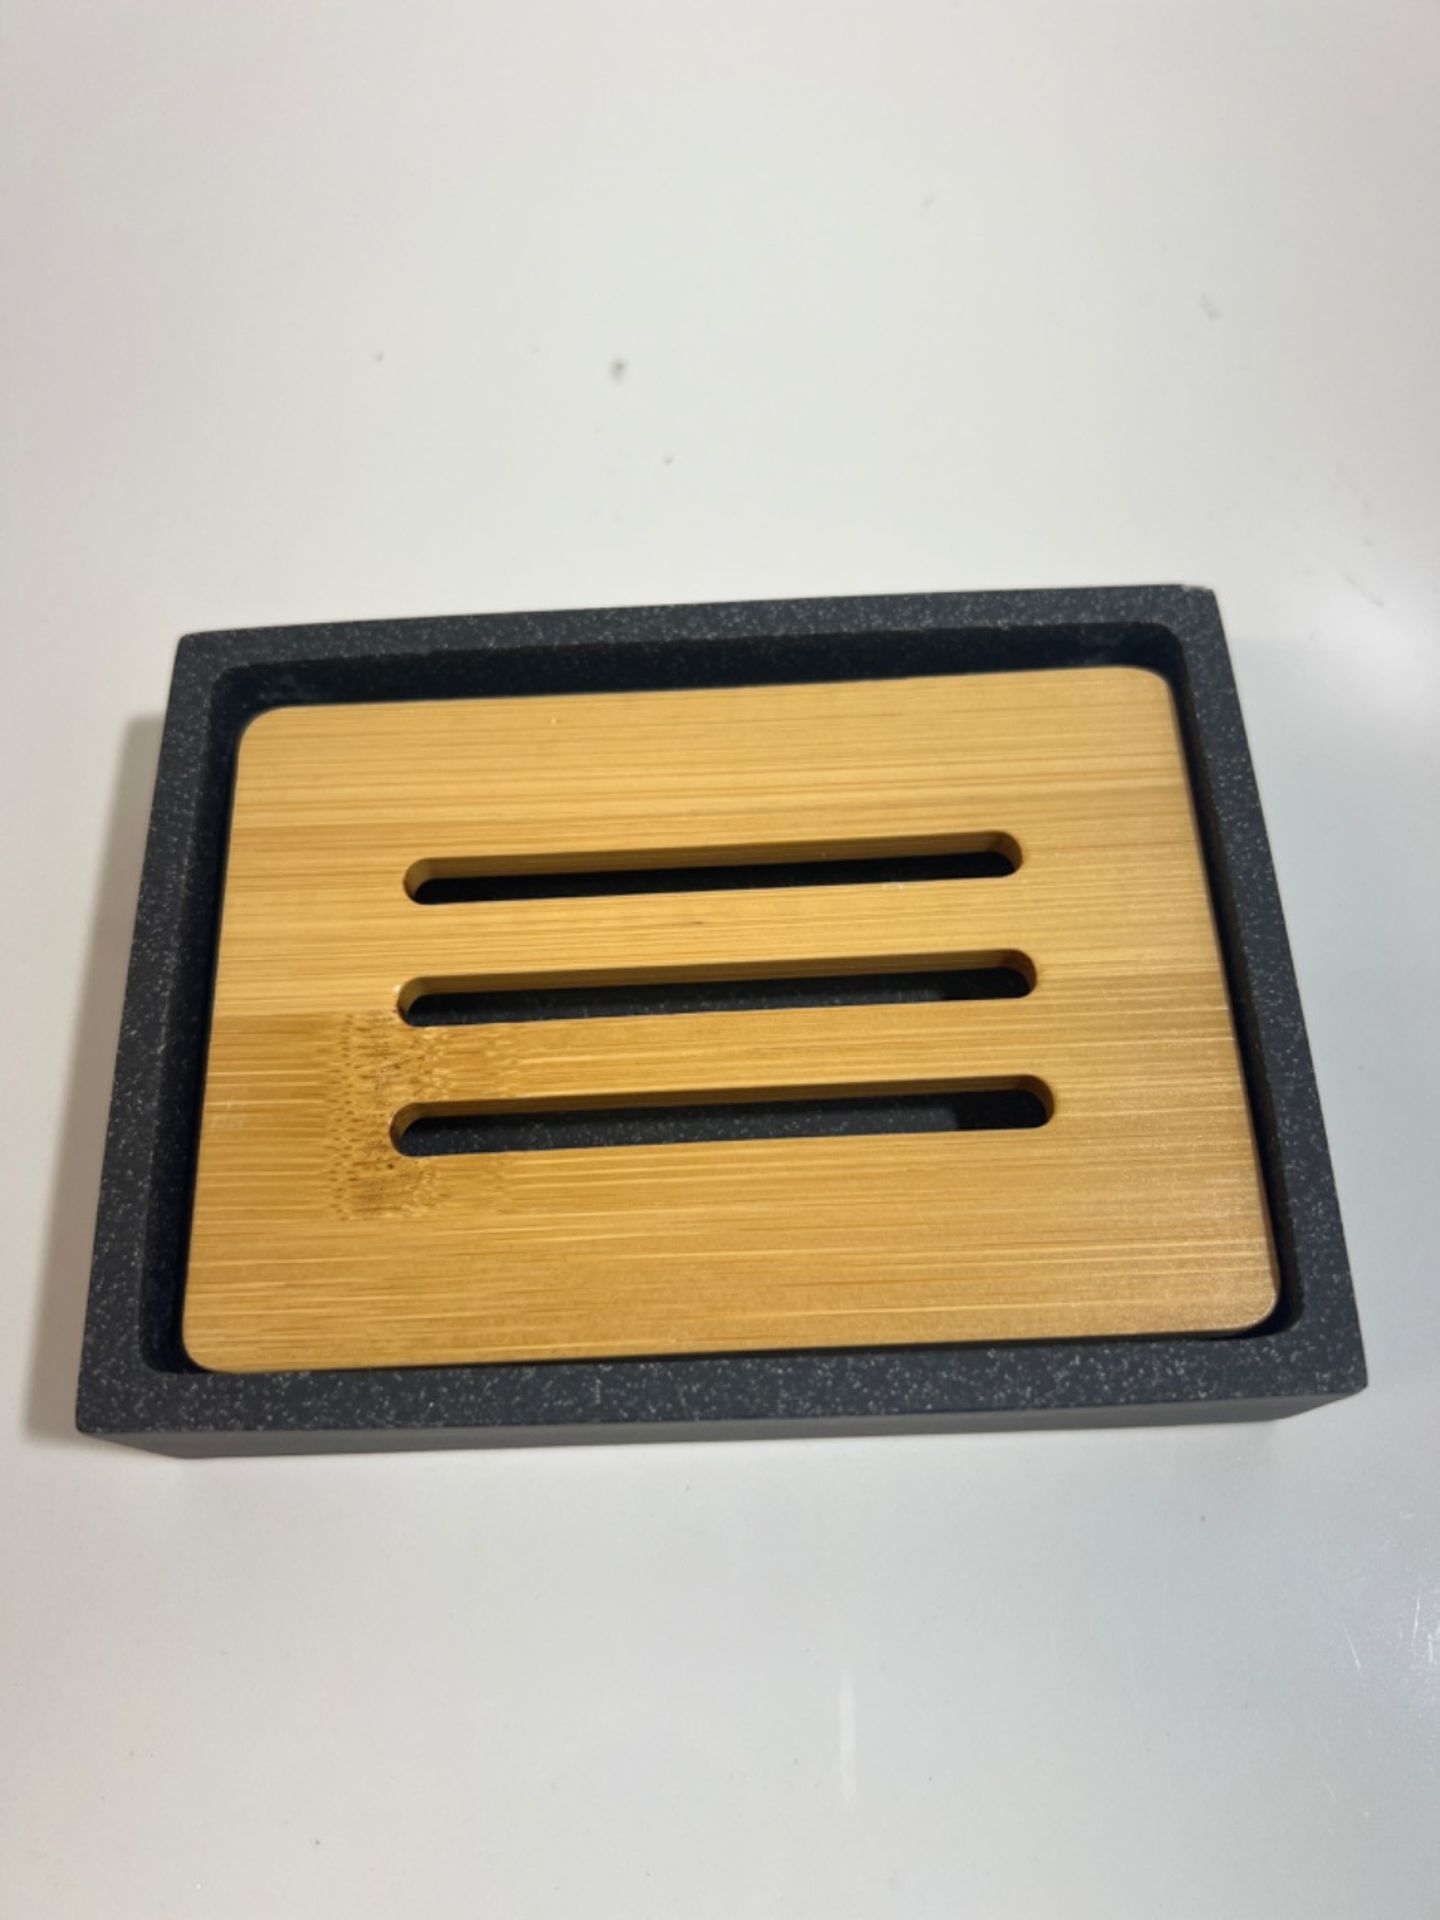 Luxspire Soap Dish Tray, Resin Soap Dish, Bamboo Soap Bar Holder Box for Shower Kitchen Sink, Doubl - Image 3 of 3